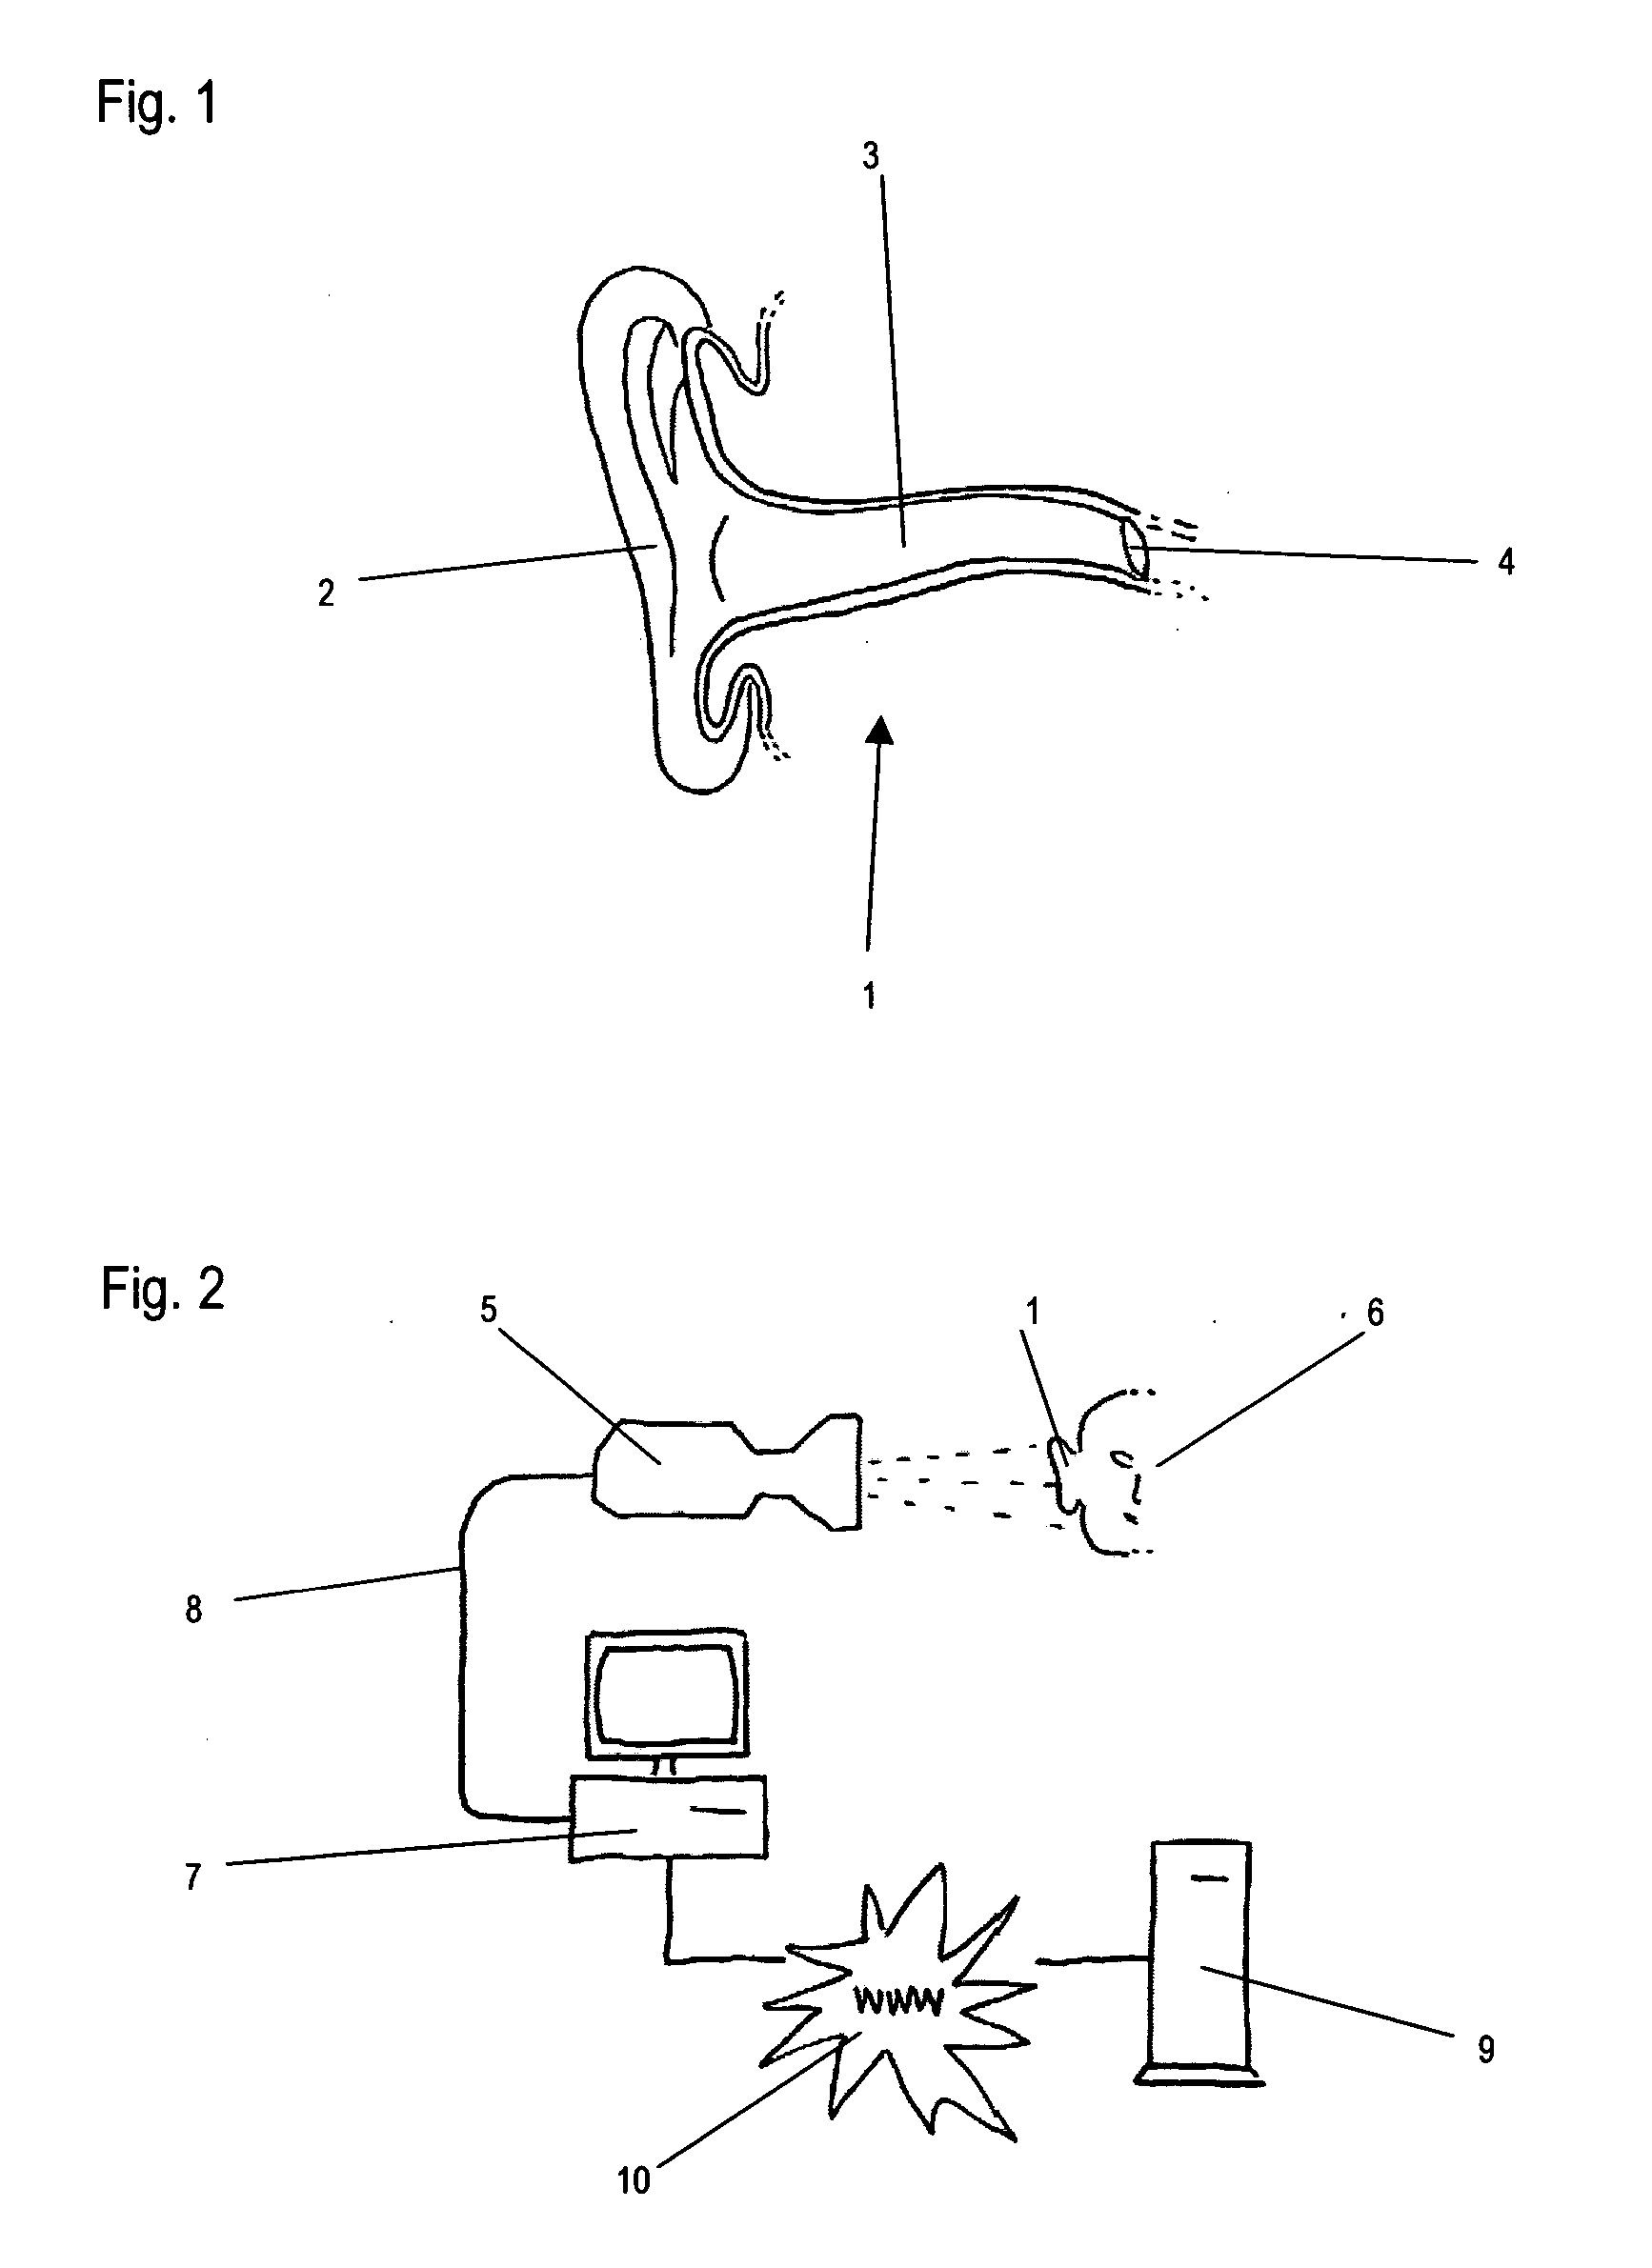 Method of obtaining a three-dimensional image of the outer ear canal